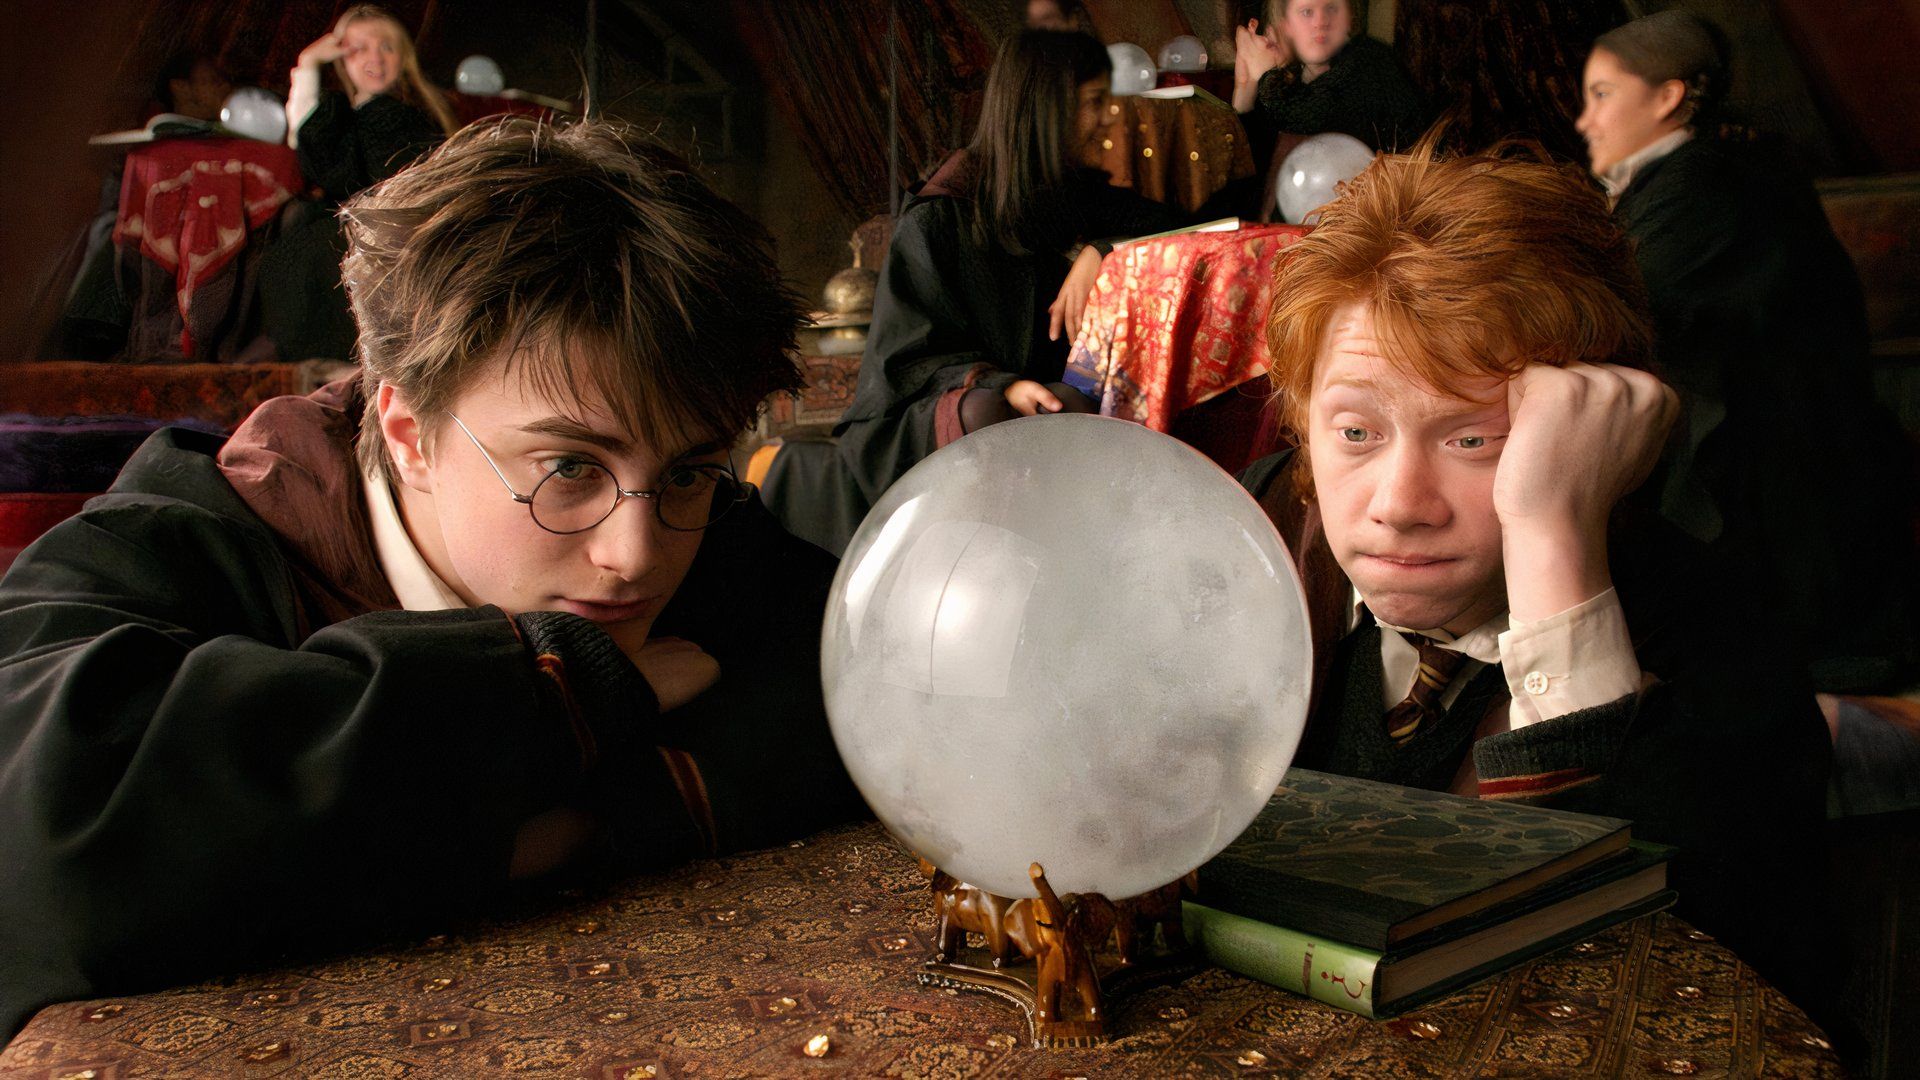 Daniel Radcliffe and Rupert Grint in Harry Potter and the Prisoner of Azkaban